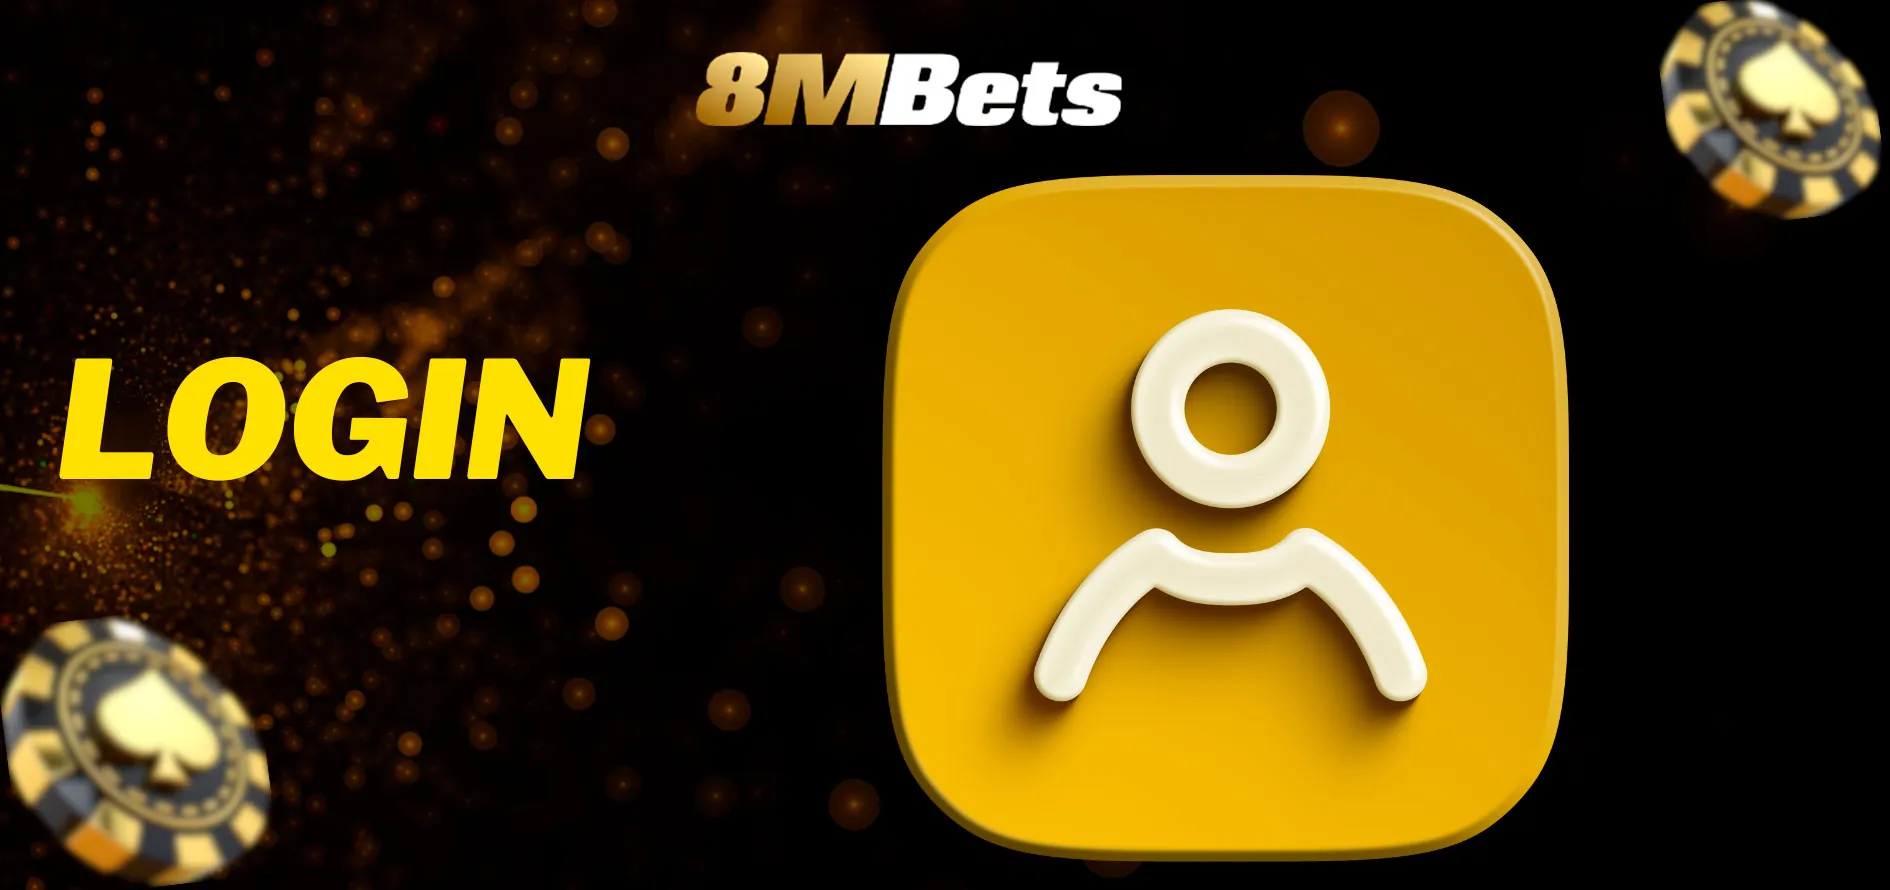 8mbets Login - Easy Access to Your Casino Account